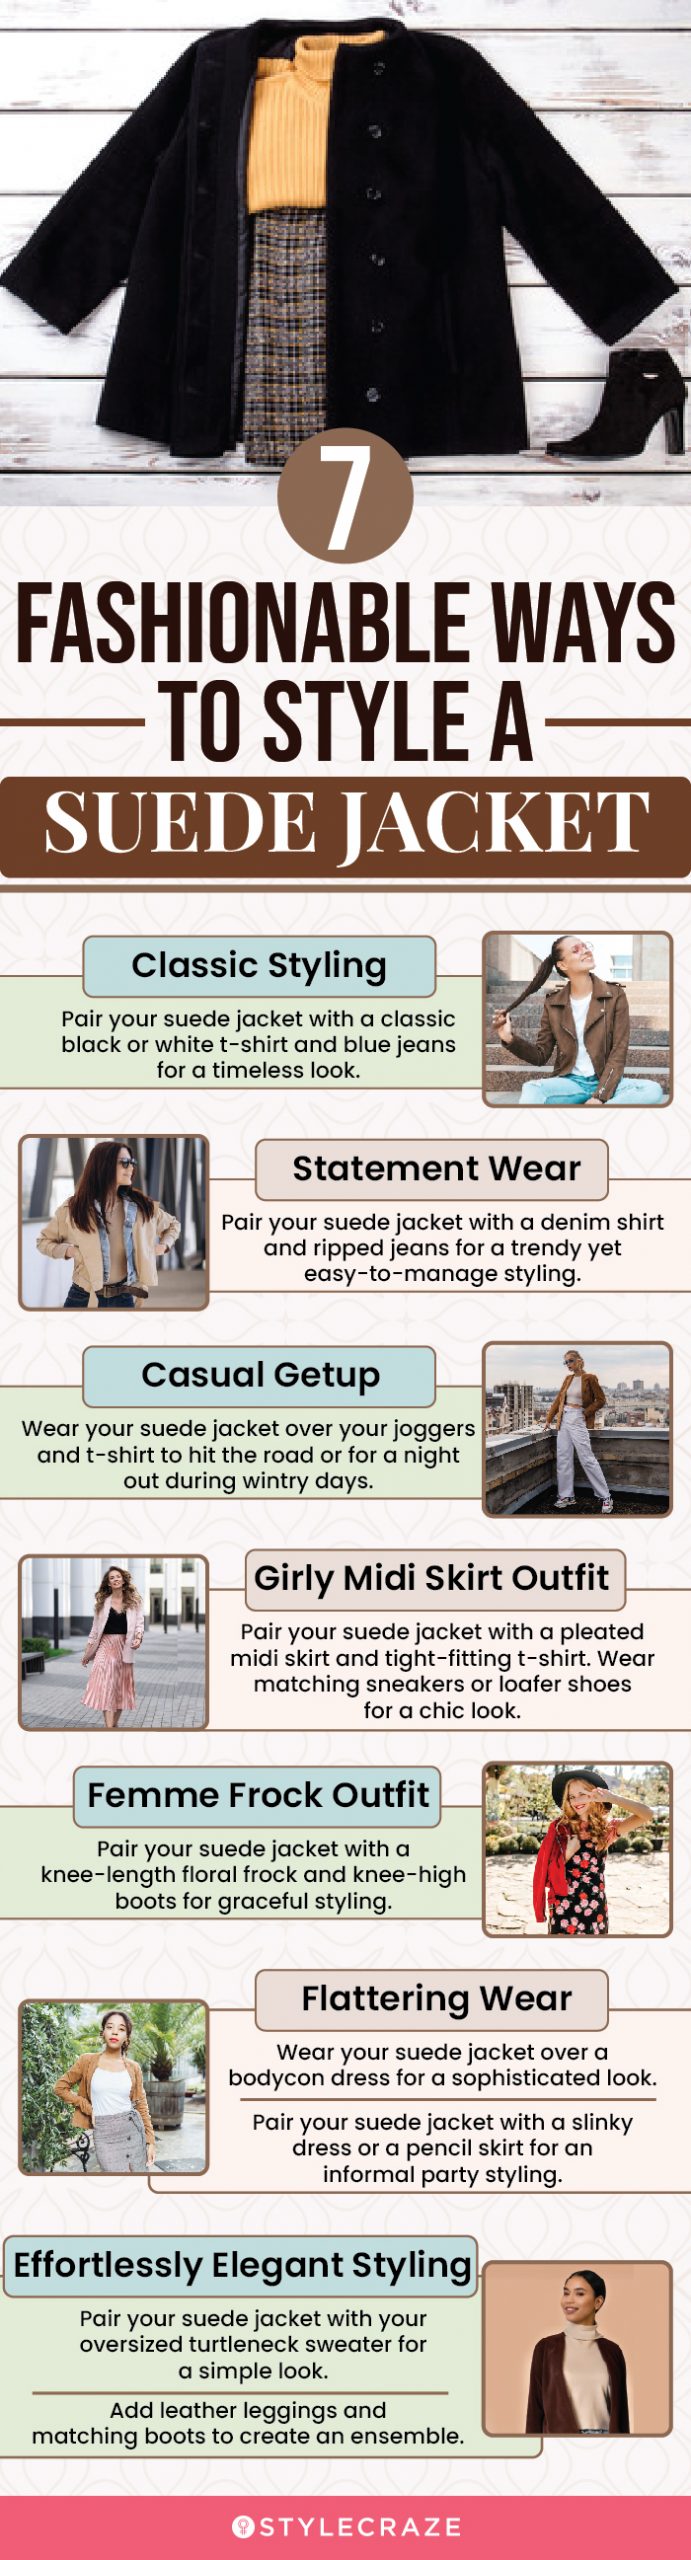 7 Fashionable Ways To Style A Suede Jacket (infographic)